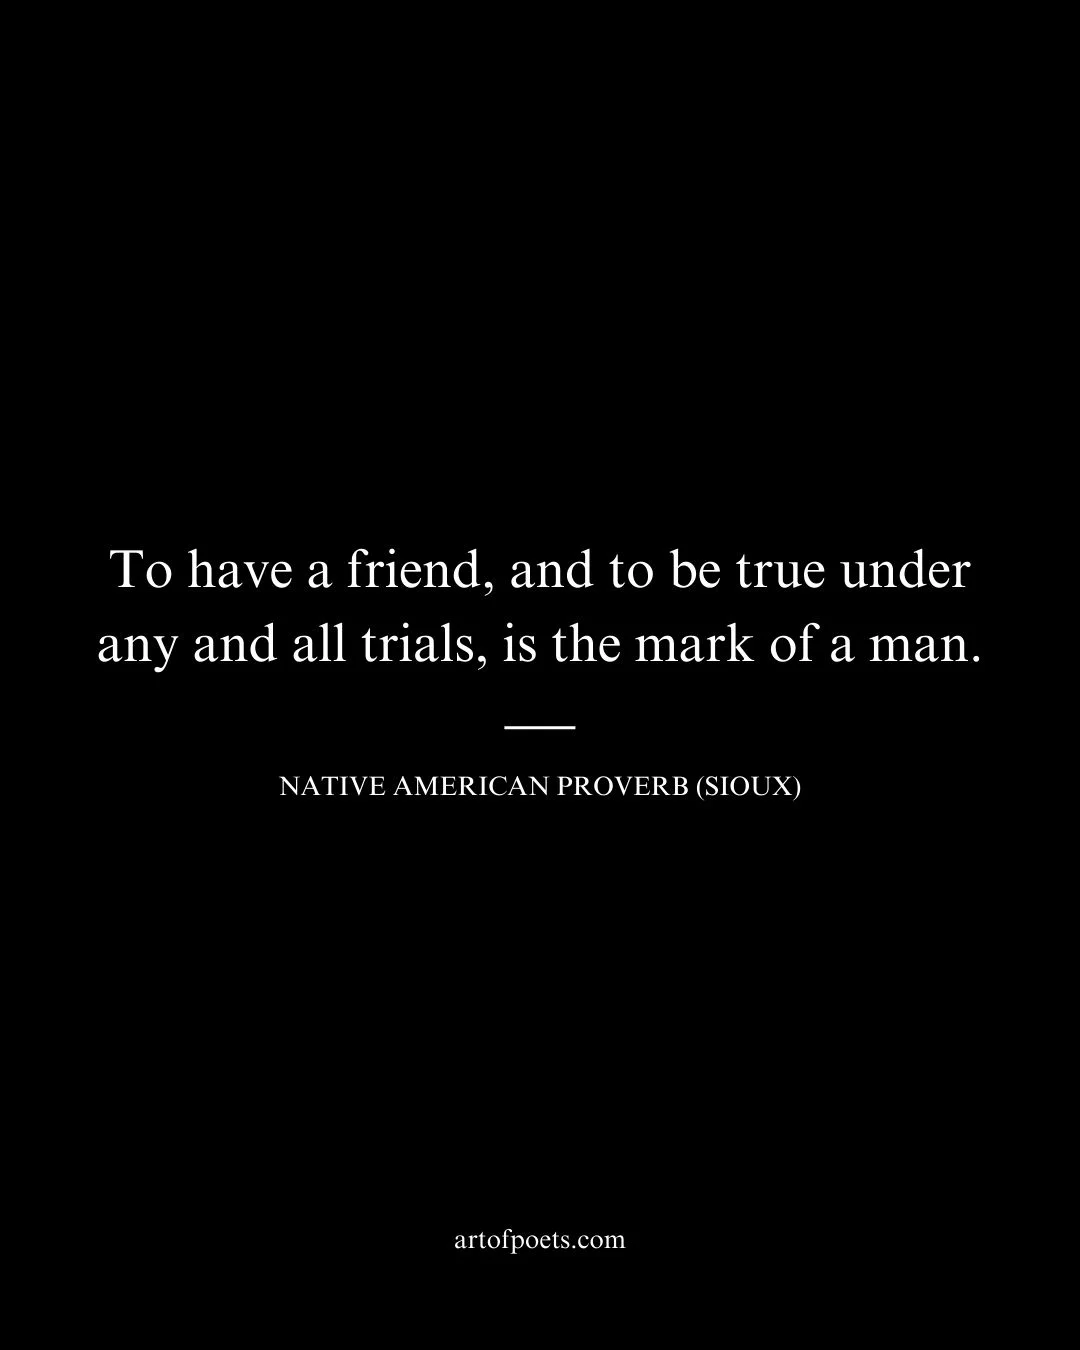 To have a friend and to be true under any and all trials is the mark of a man